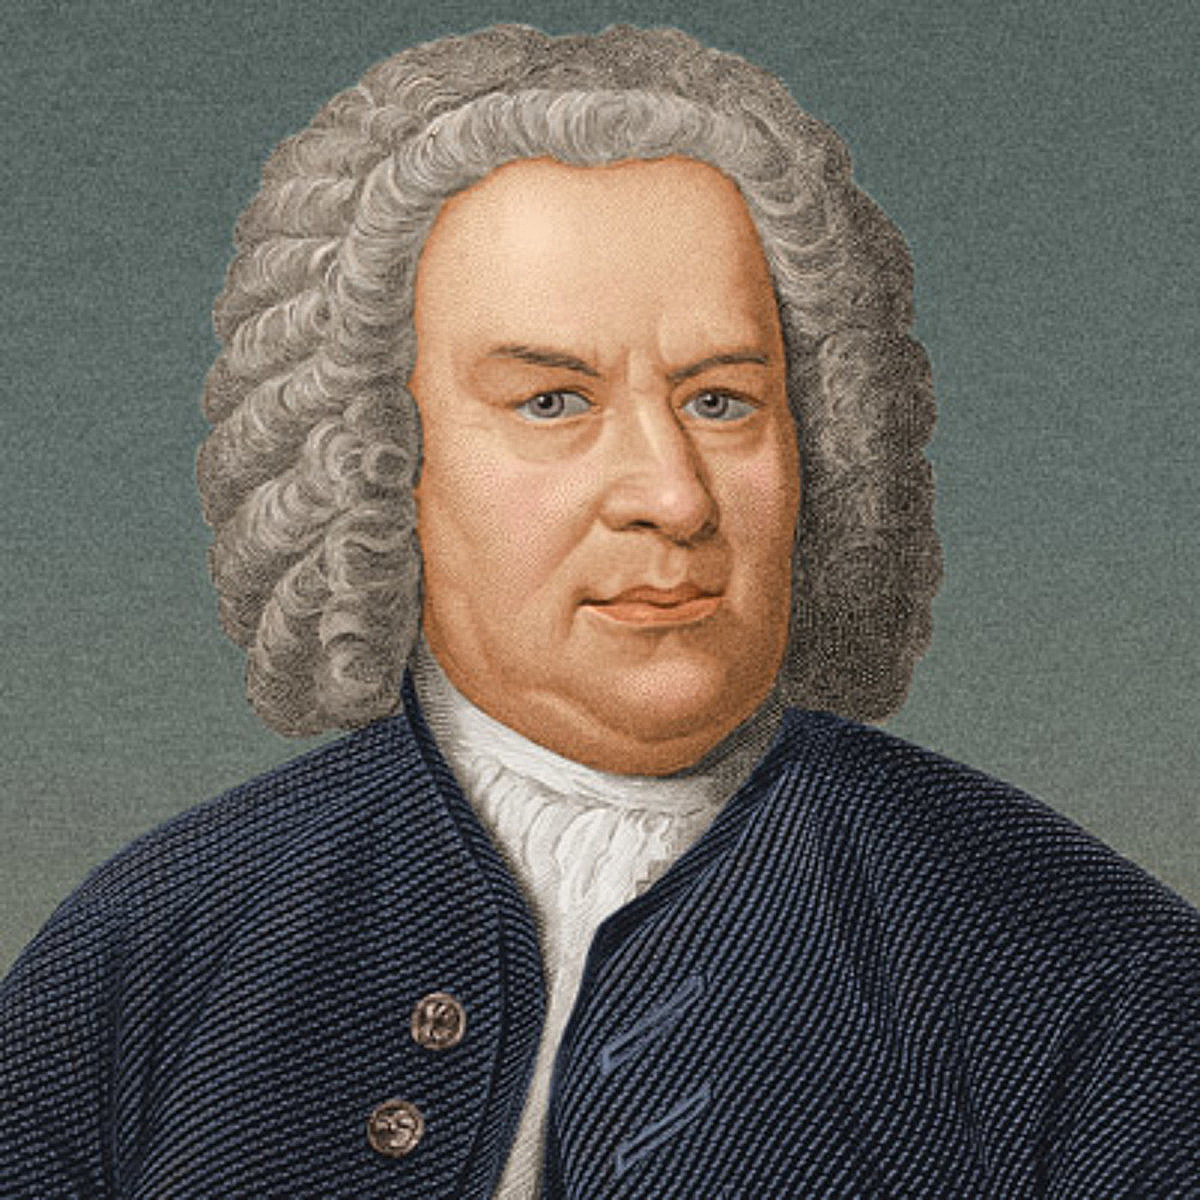 The story behind Bach’s Leipzig audition